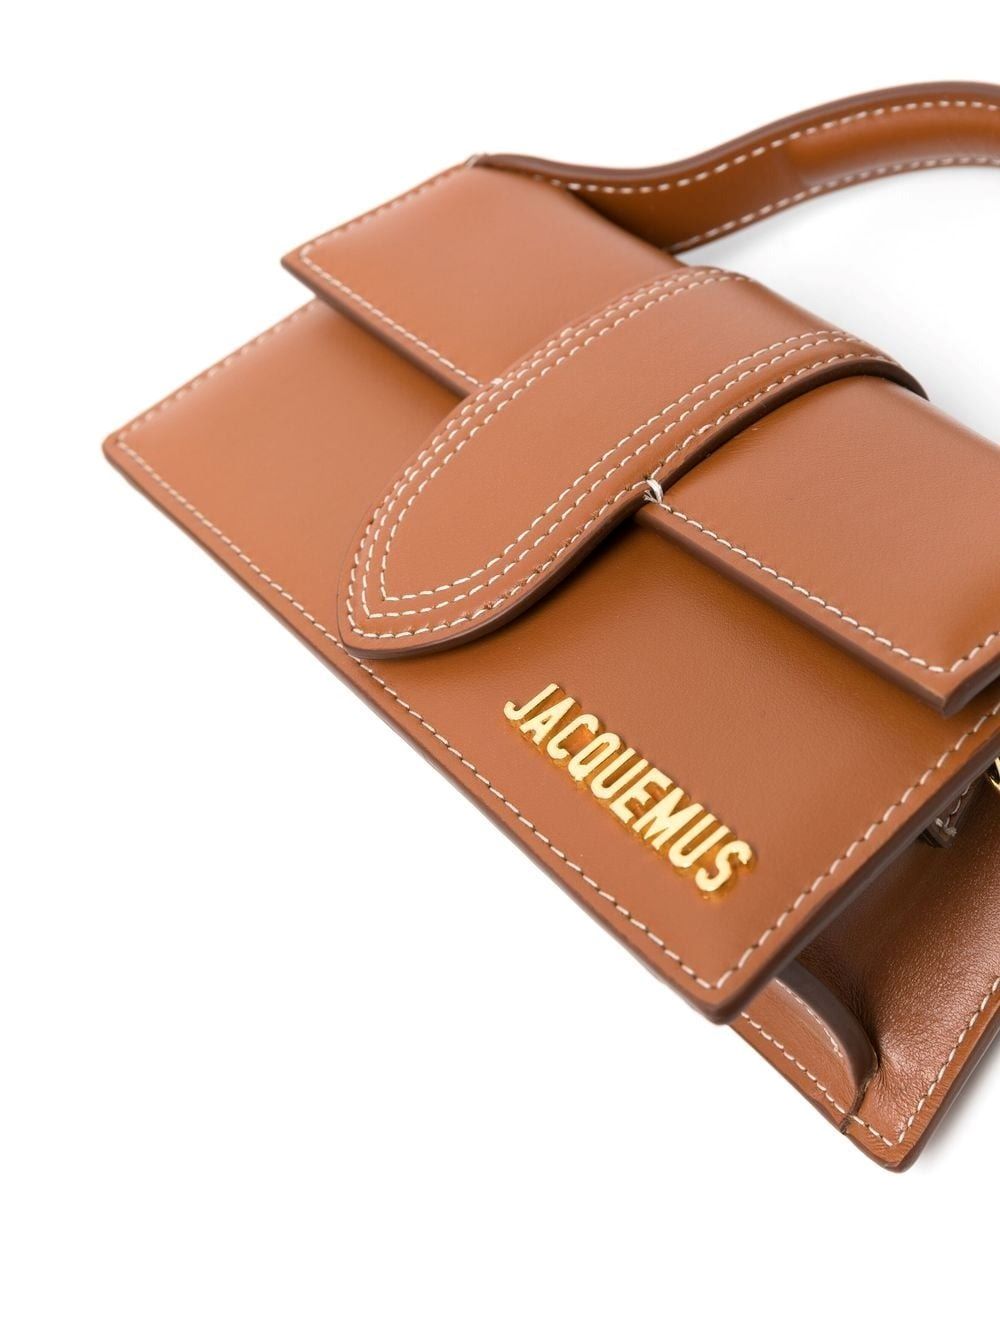 Jacquemus Le Bambino Leather Top Handle Shoulder Bag in Light Brown